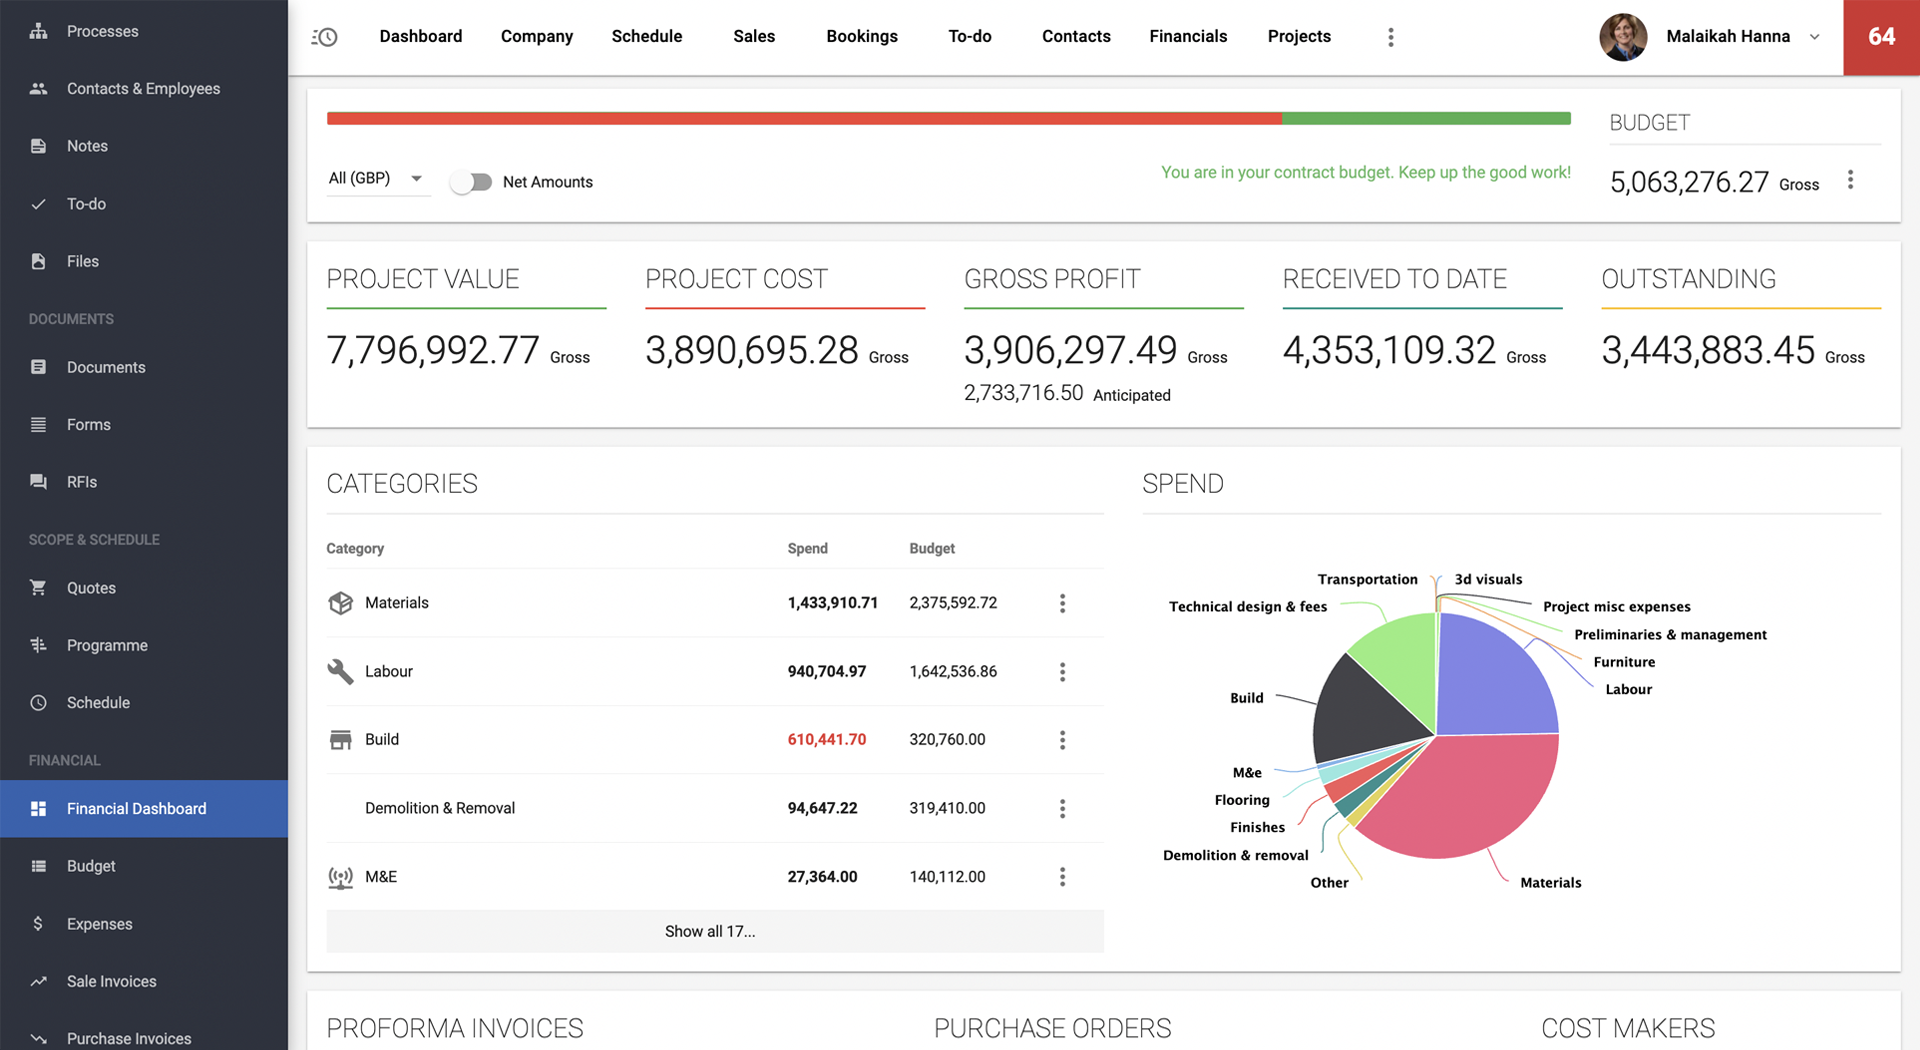 View on the construction project budget in Archdesk construction management software.